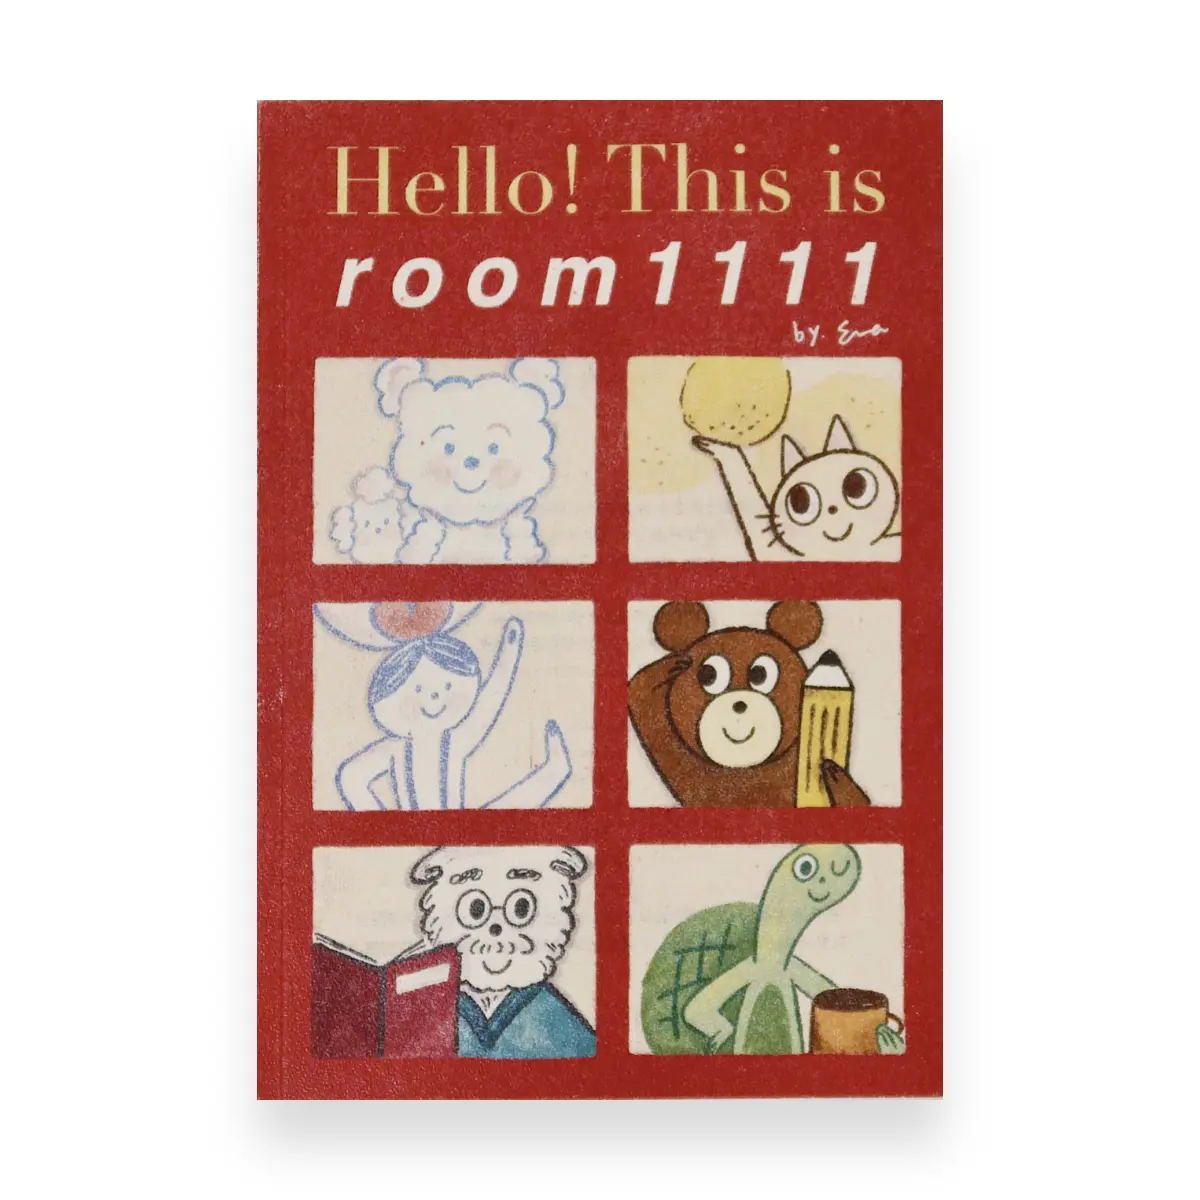 Hello! This is room 1111書籍封面